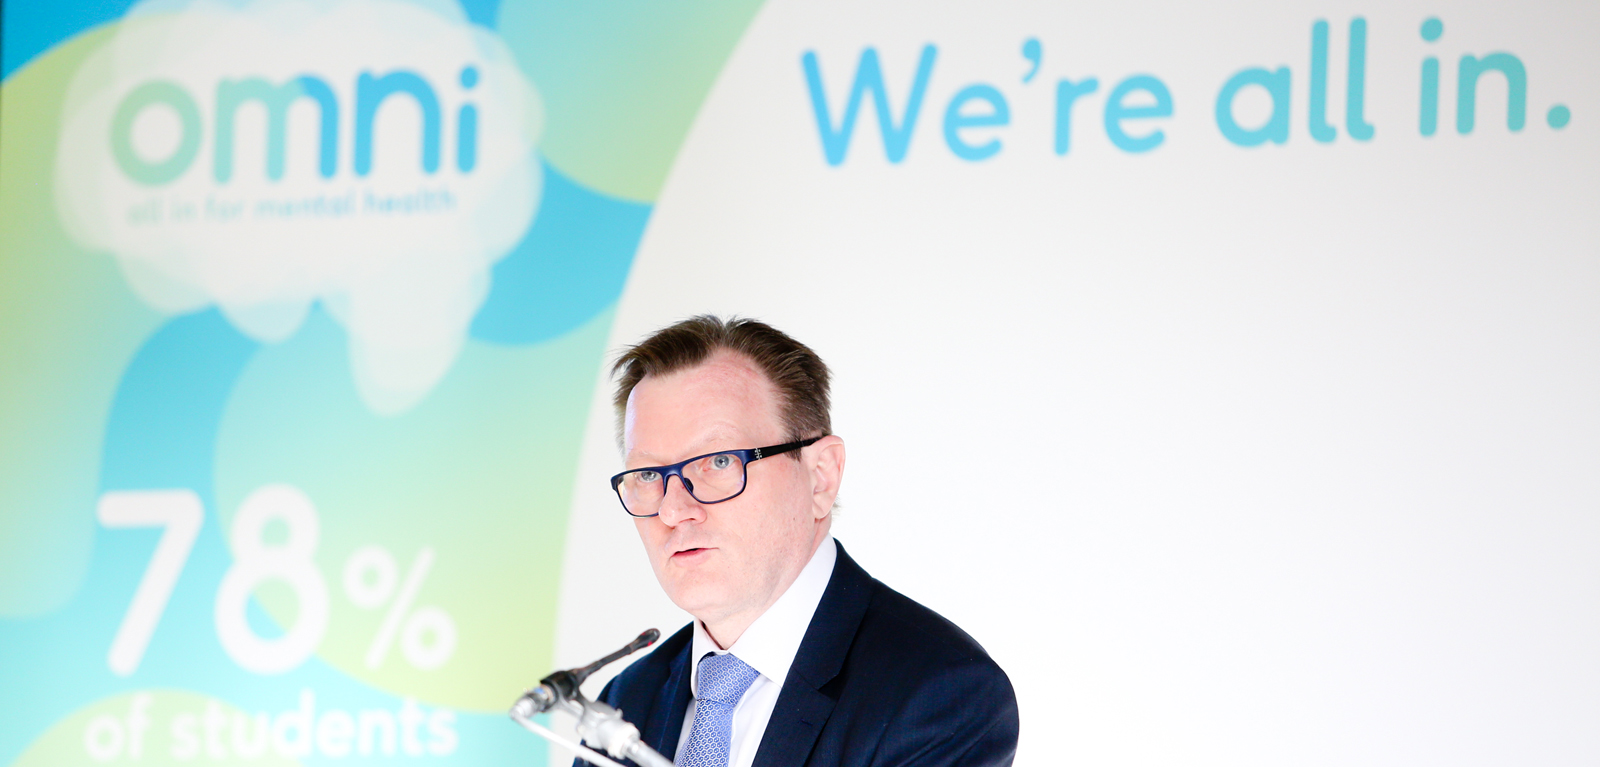 Vice-Chancellor Professor Ian Greer speaking at the launch of OMNI – All in for mental health campaign – February 2019